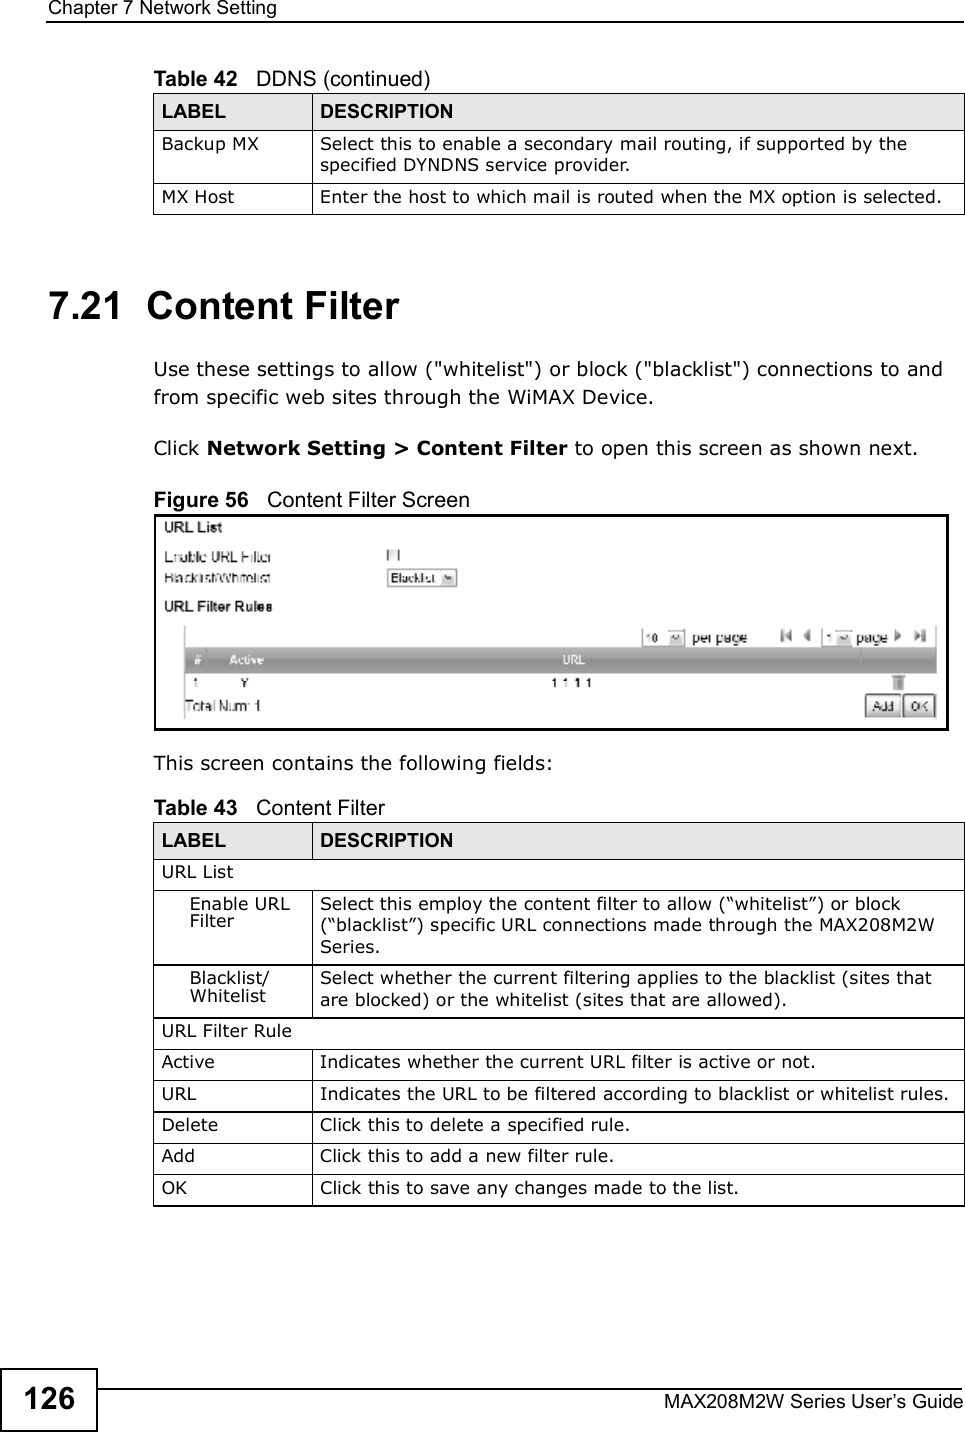 Chapter 7Network SettingMAX208M2W Series User s Guide1267.21  Content FilterUse these settings to allow (&quot;whitelist&quot;) or block (&quot;blacklist&quot;) connections to and from specific web sites through the WiMAX Device.Click Network Setting &gt; Content Filter to open this screen as shown next.Figure 56   Content Filter ScreenThis screen contains the following fields:Backup MXSelect this to enable a secondary mail routing, if supported by the specified DYNDNS service provider.MX HostEnter the host to which mail is routed when the MX option is selected.Table 42   DDNS (continued)LABEL DESCRIPTIONTable 43   Content FilterLABEL DESCRIPTIONURL ListEnable URL FilterSelect this employ the content filter to allow (&quot;whitelist#) or block (&quot;blacklist#) specific URL connections made through the MAX208M2W Series.Blacklist/WhitelistSelect whether the current filtering applies to the blacklist (sites that are blocked) or the whitelist (sites that are allowed).URL Filter RuleActiveIndicates whether the current URL filter is active or not.URLIndicates the URL to be filtered according to blacklist or whitelist rules.DeleteClick this to delete a specified rule.AddClick this to add a new filter rule.OKClick this to save any changes made to the list.